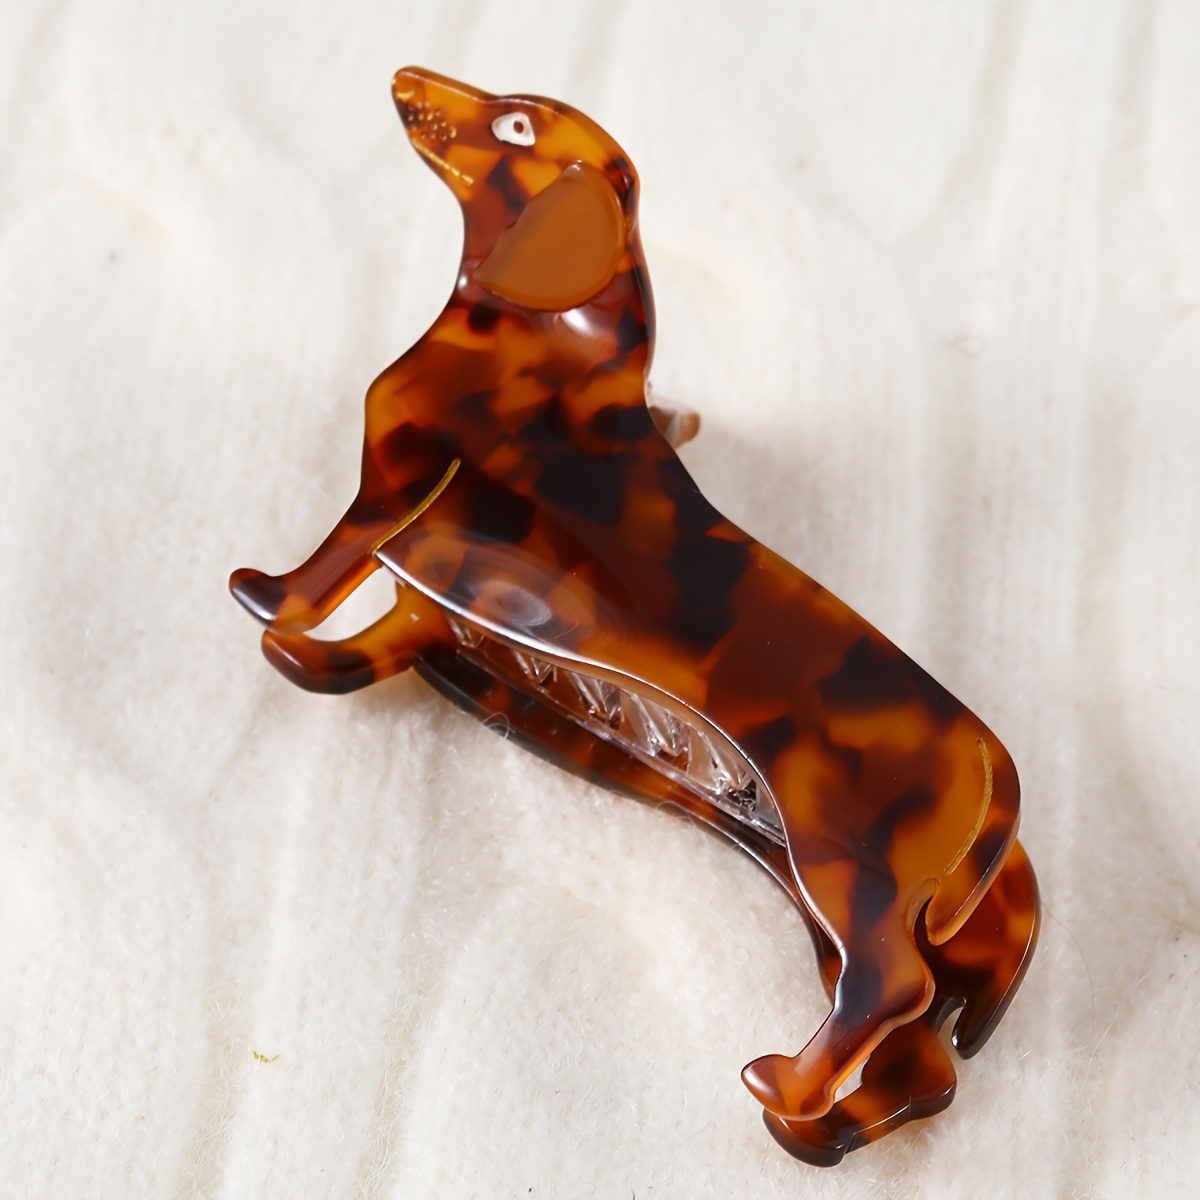 

Elegant Oval Acetic Acid Hair Claw Clip With Dachshund Dog Design, Animal Motif, Color Matching Print, Suitable For Women And Teens 14+, Ideal Birthday Gift - Single Piece